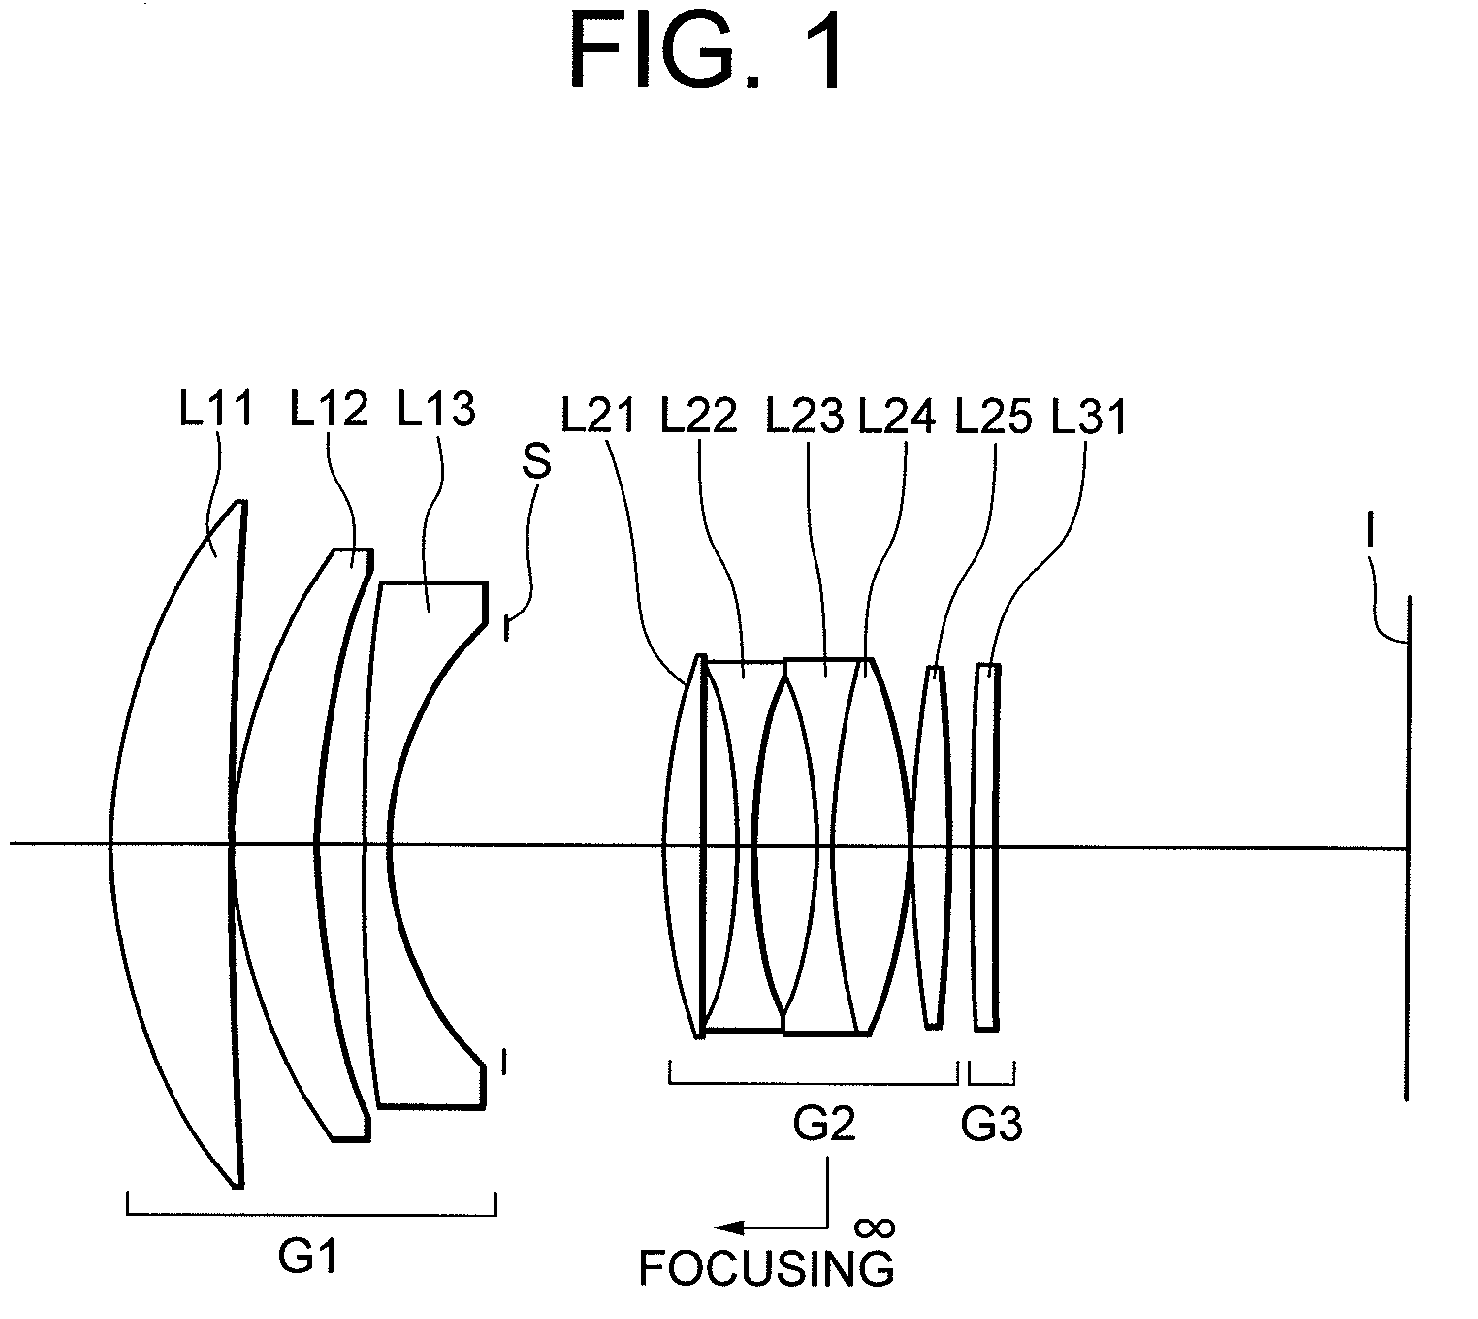 Optical system, method for focusing, and imaging apparatus equipped therewith